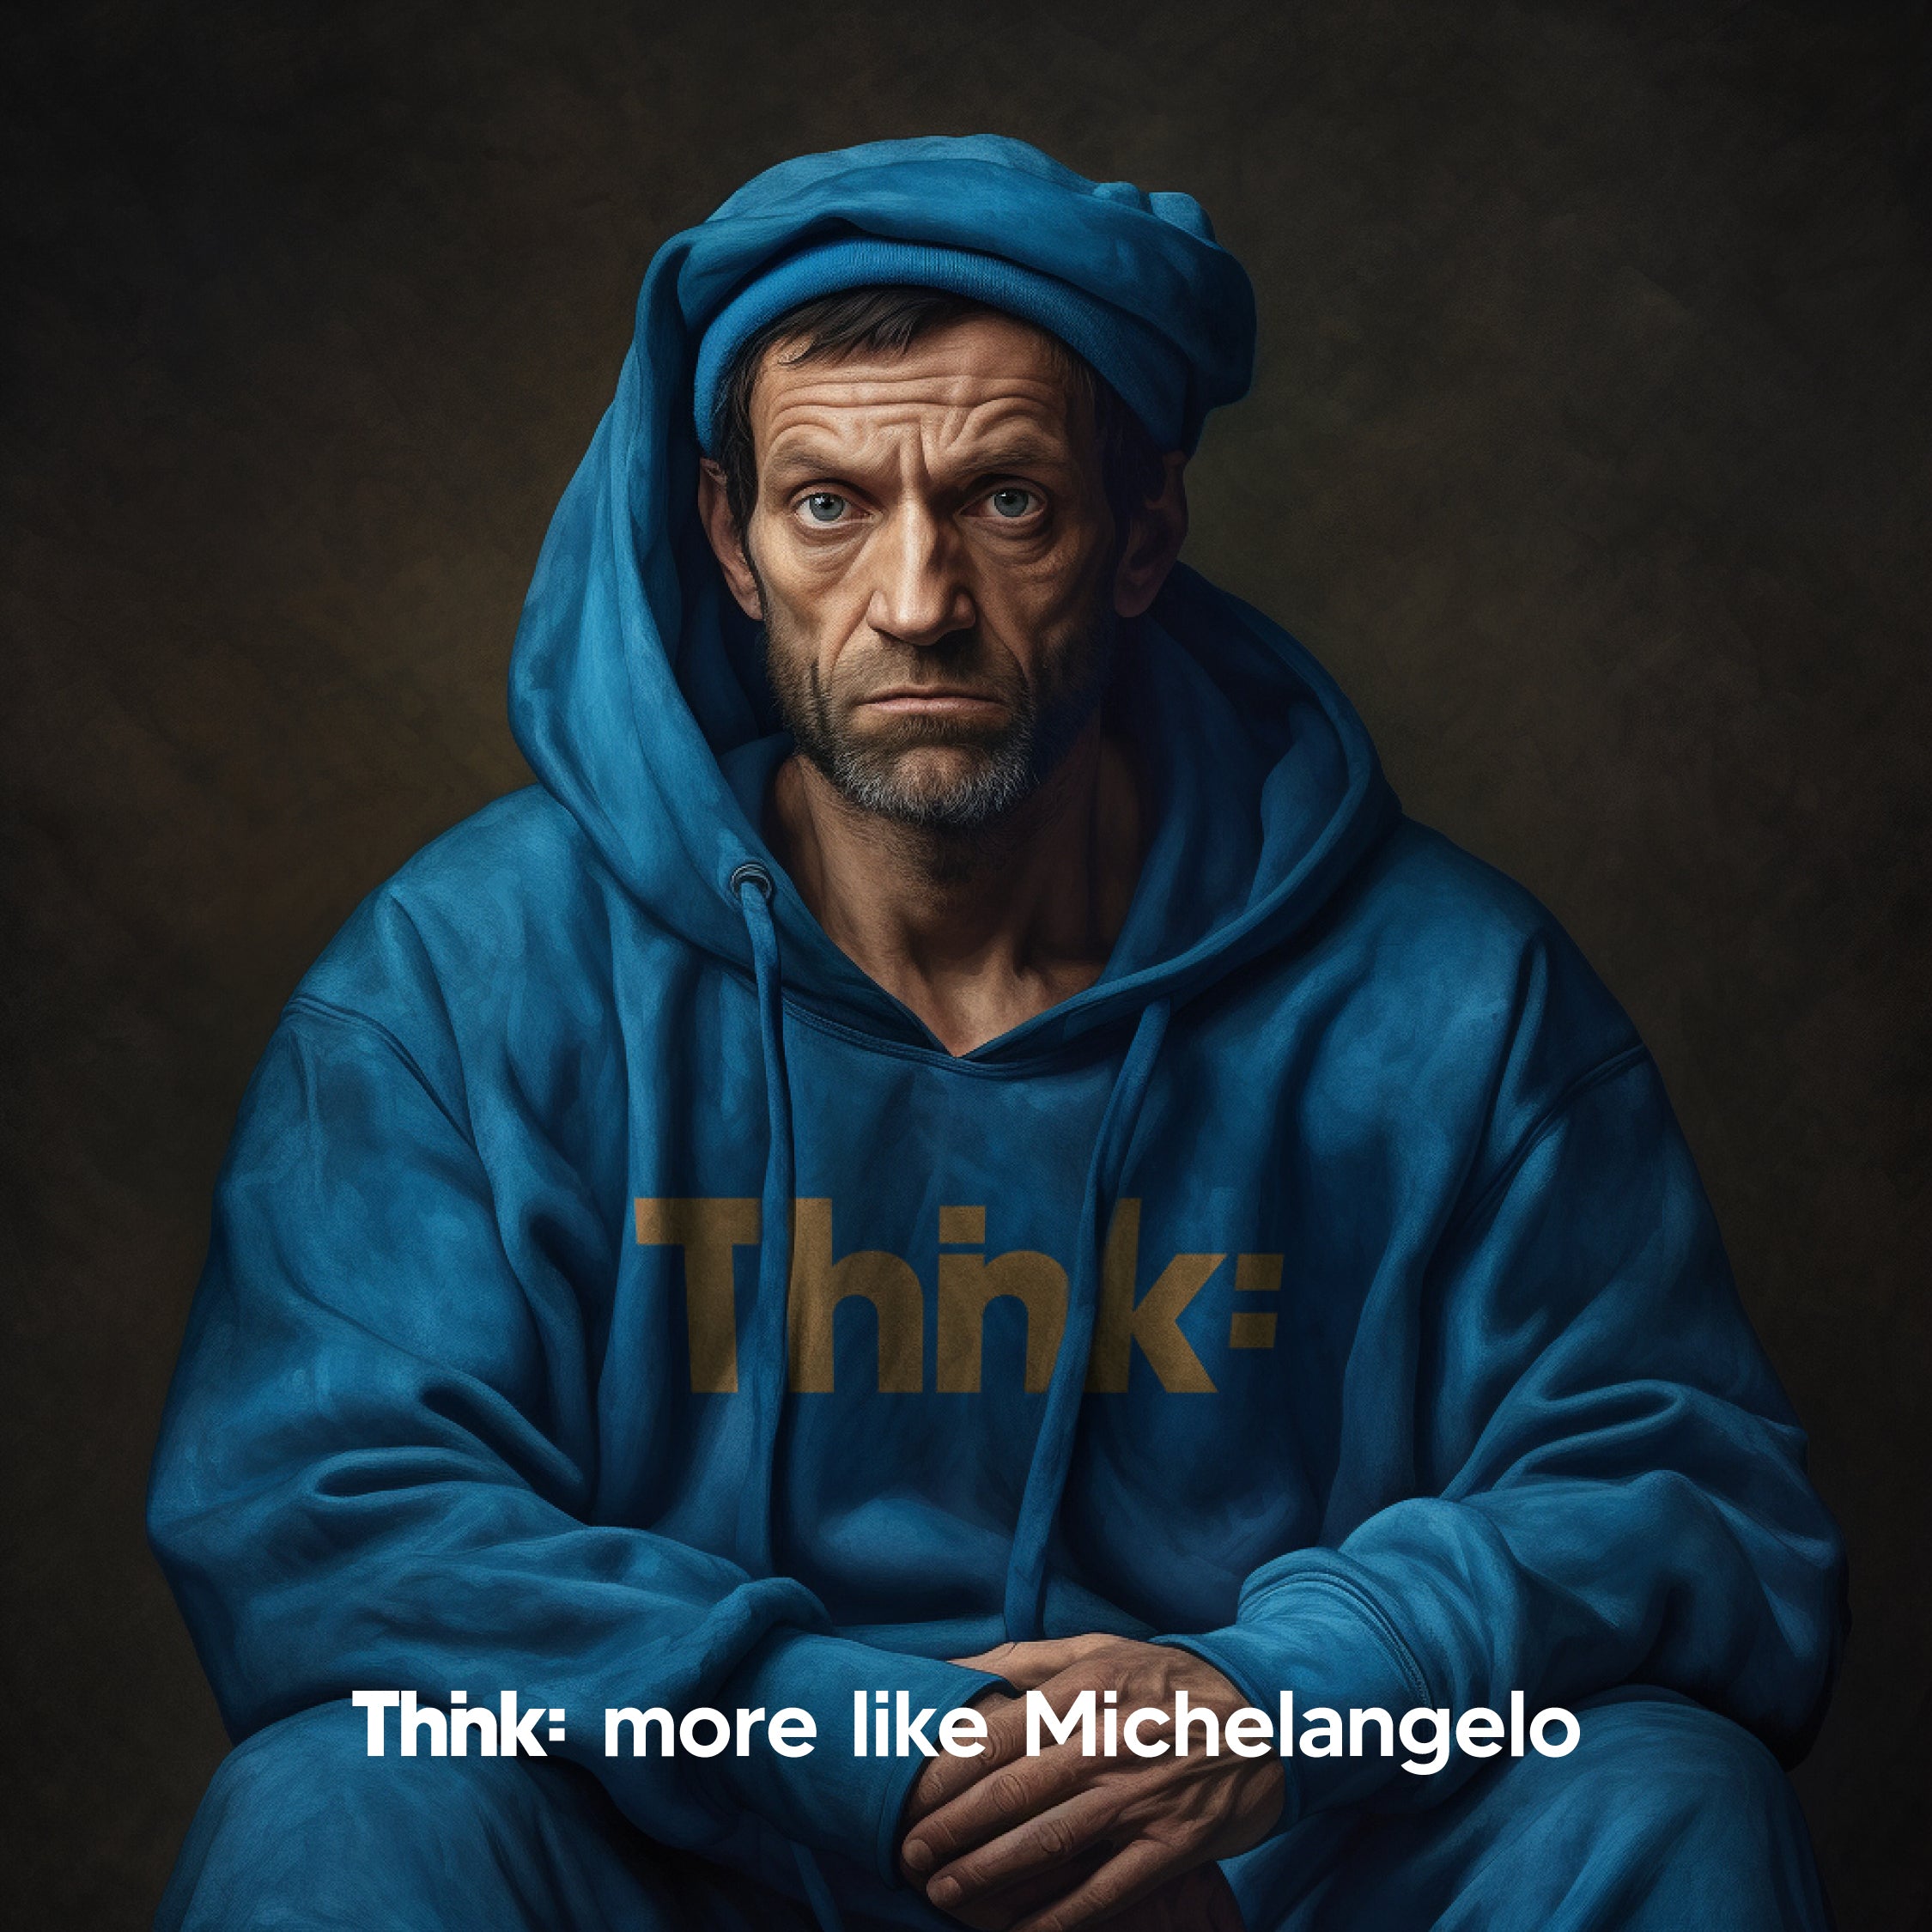 Thnk: More Like Michelangelo